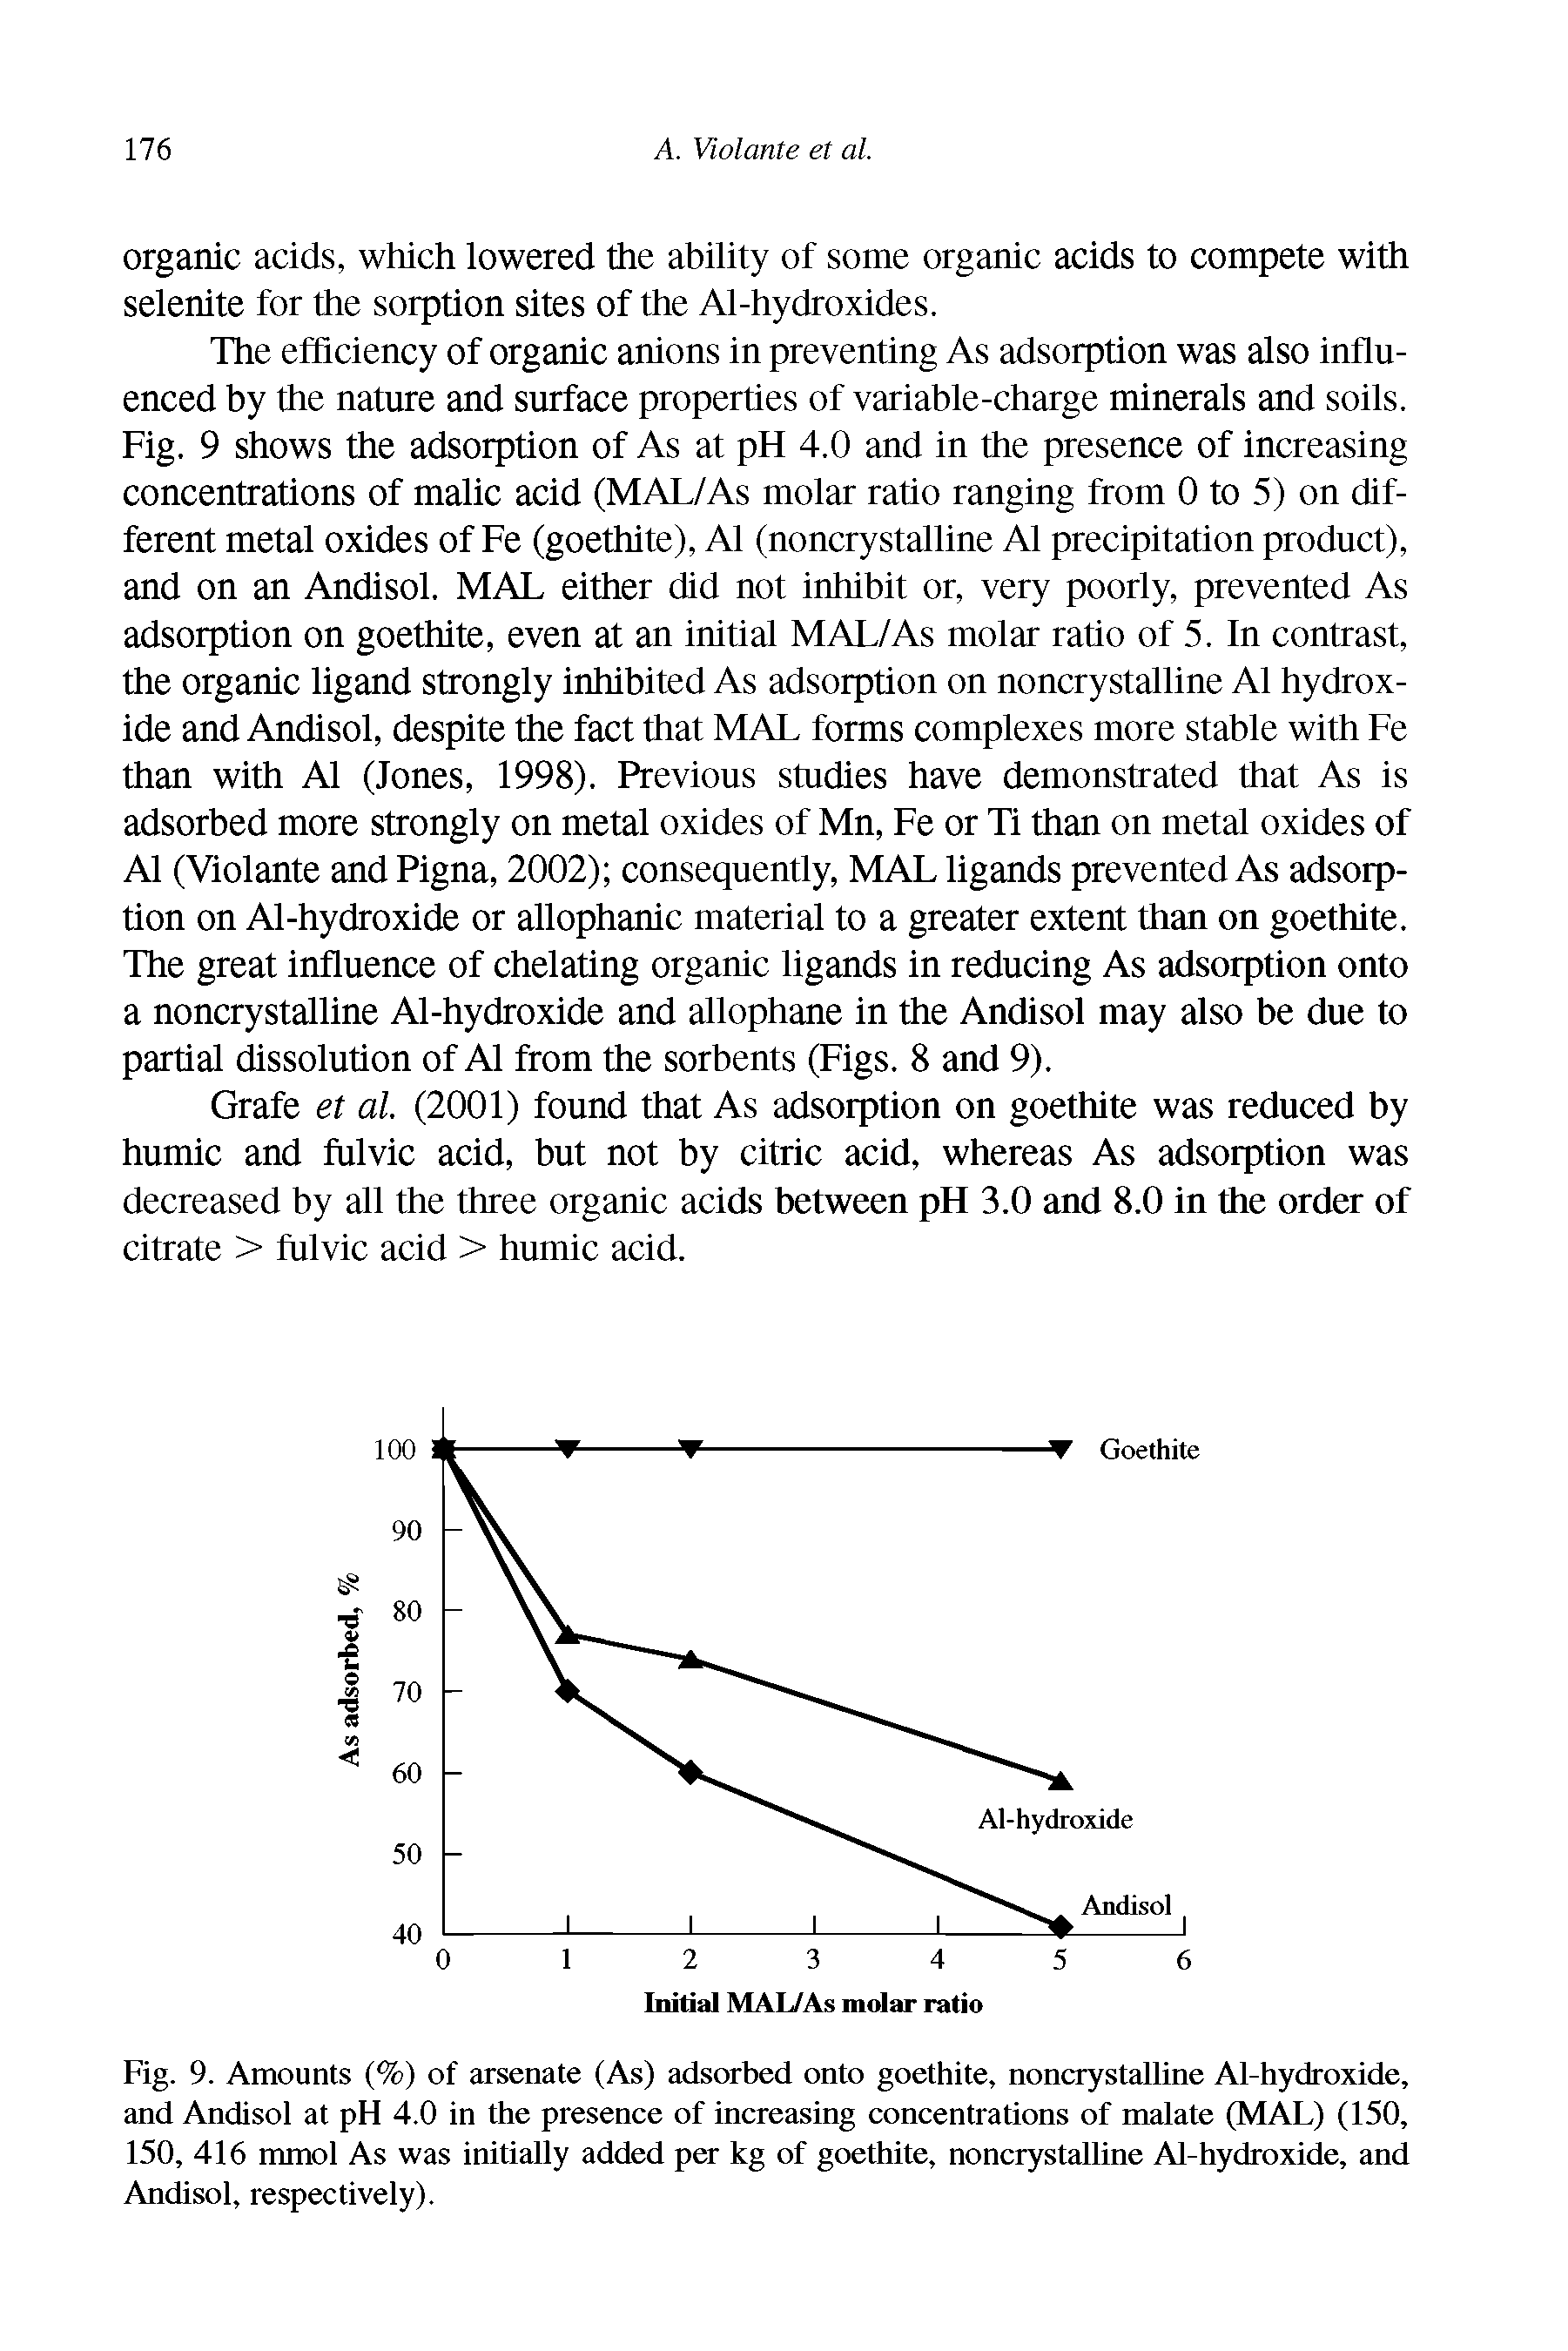 Fig. 9. Amounts (%) of arsenate (As) adsorbed onto goethite, noncrystalline Al-hydroxide, and Andisol at pH 4.0 in the presence of increasing concentrations of malate (MAL) (150, 150, 416 mmol As was initially added per kg of goethite, noncrystalline Al-hydroxide, and Andisol, respectively).